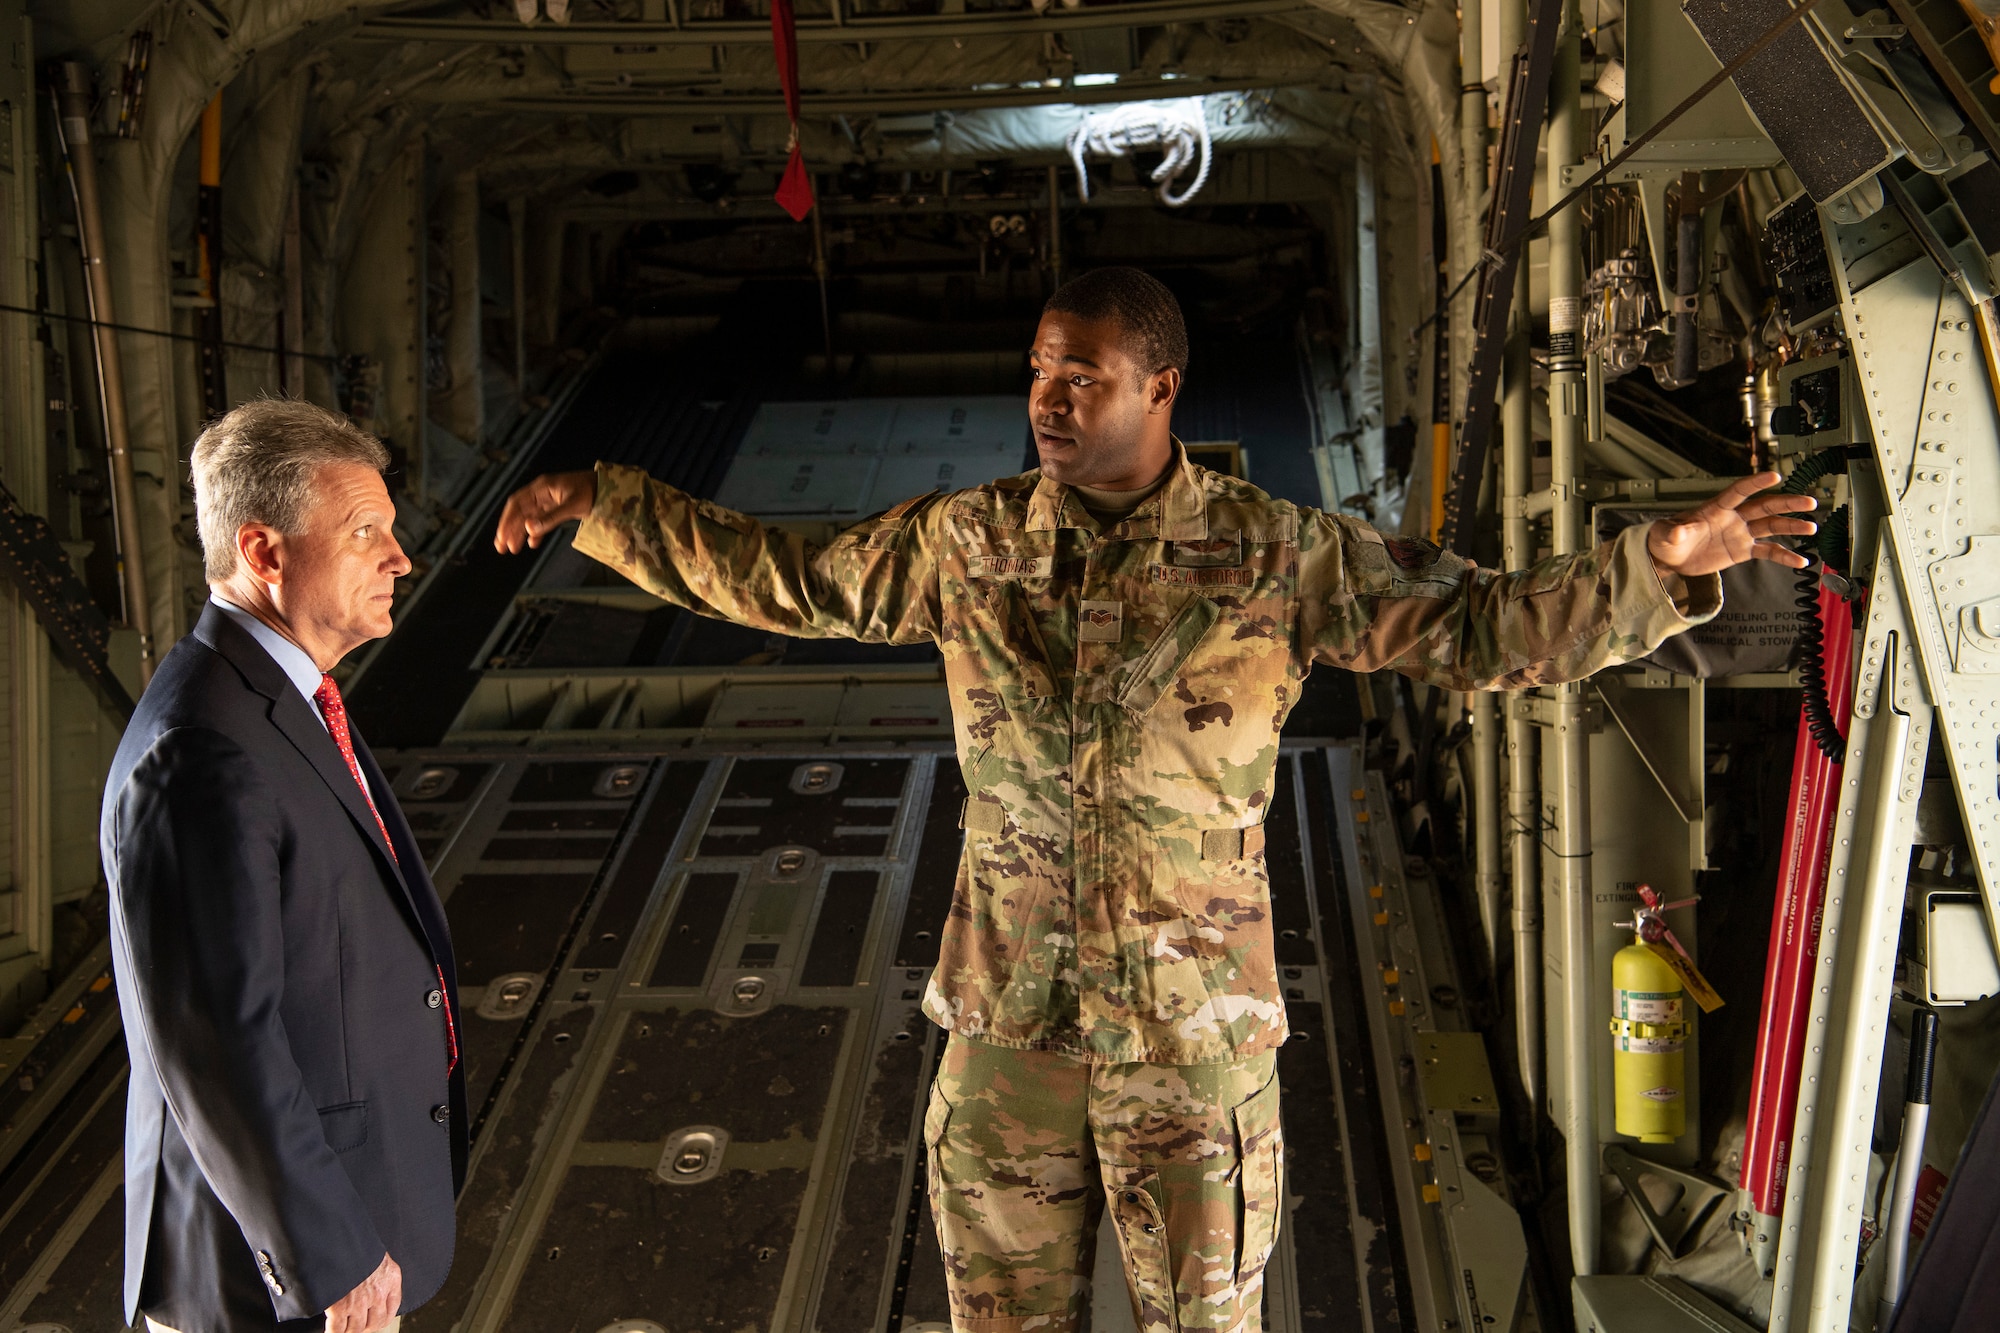 Staff Sgt. Wynthom Thomas, 71st Rescue Squadron loadmaster, explains his job on the HC-130J Combat King II to U.S. Representative Buddy Carter, Georgia District 1, at Moody Air Force Base, Ga., Oct. 3, 2019. During his visit, Congressman Carter met Flying Tiger Airmen to learn about their contributions to the 23d Wing mission. (U.S. Air Force photo by Andrea Jenkins)